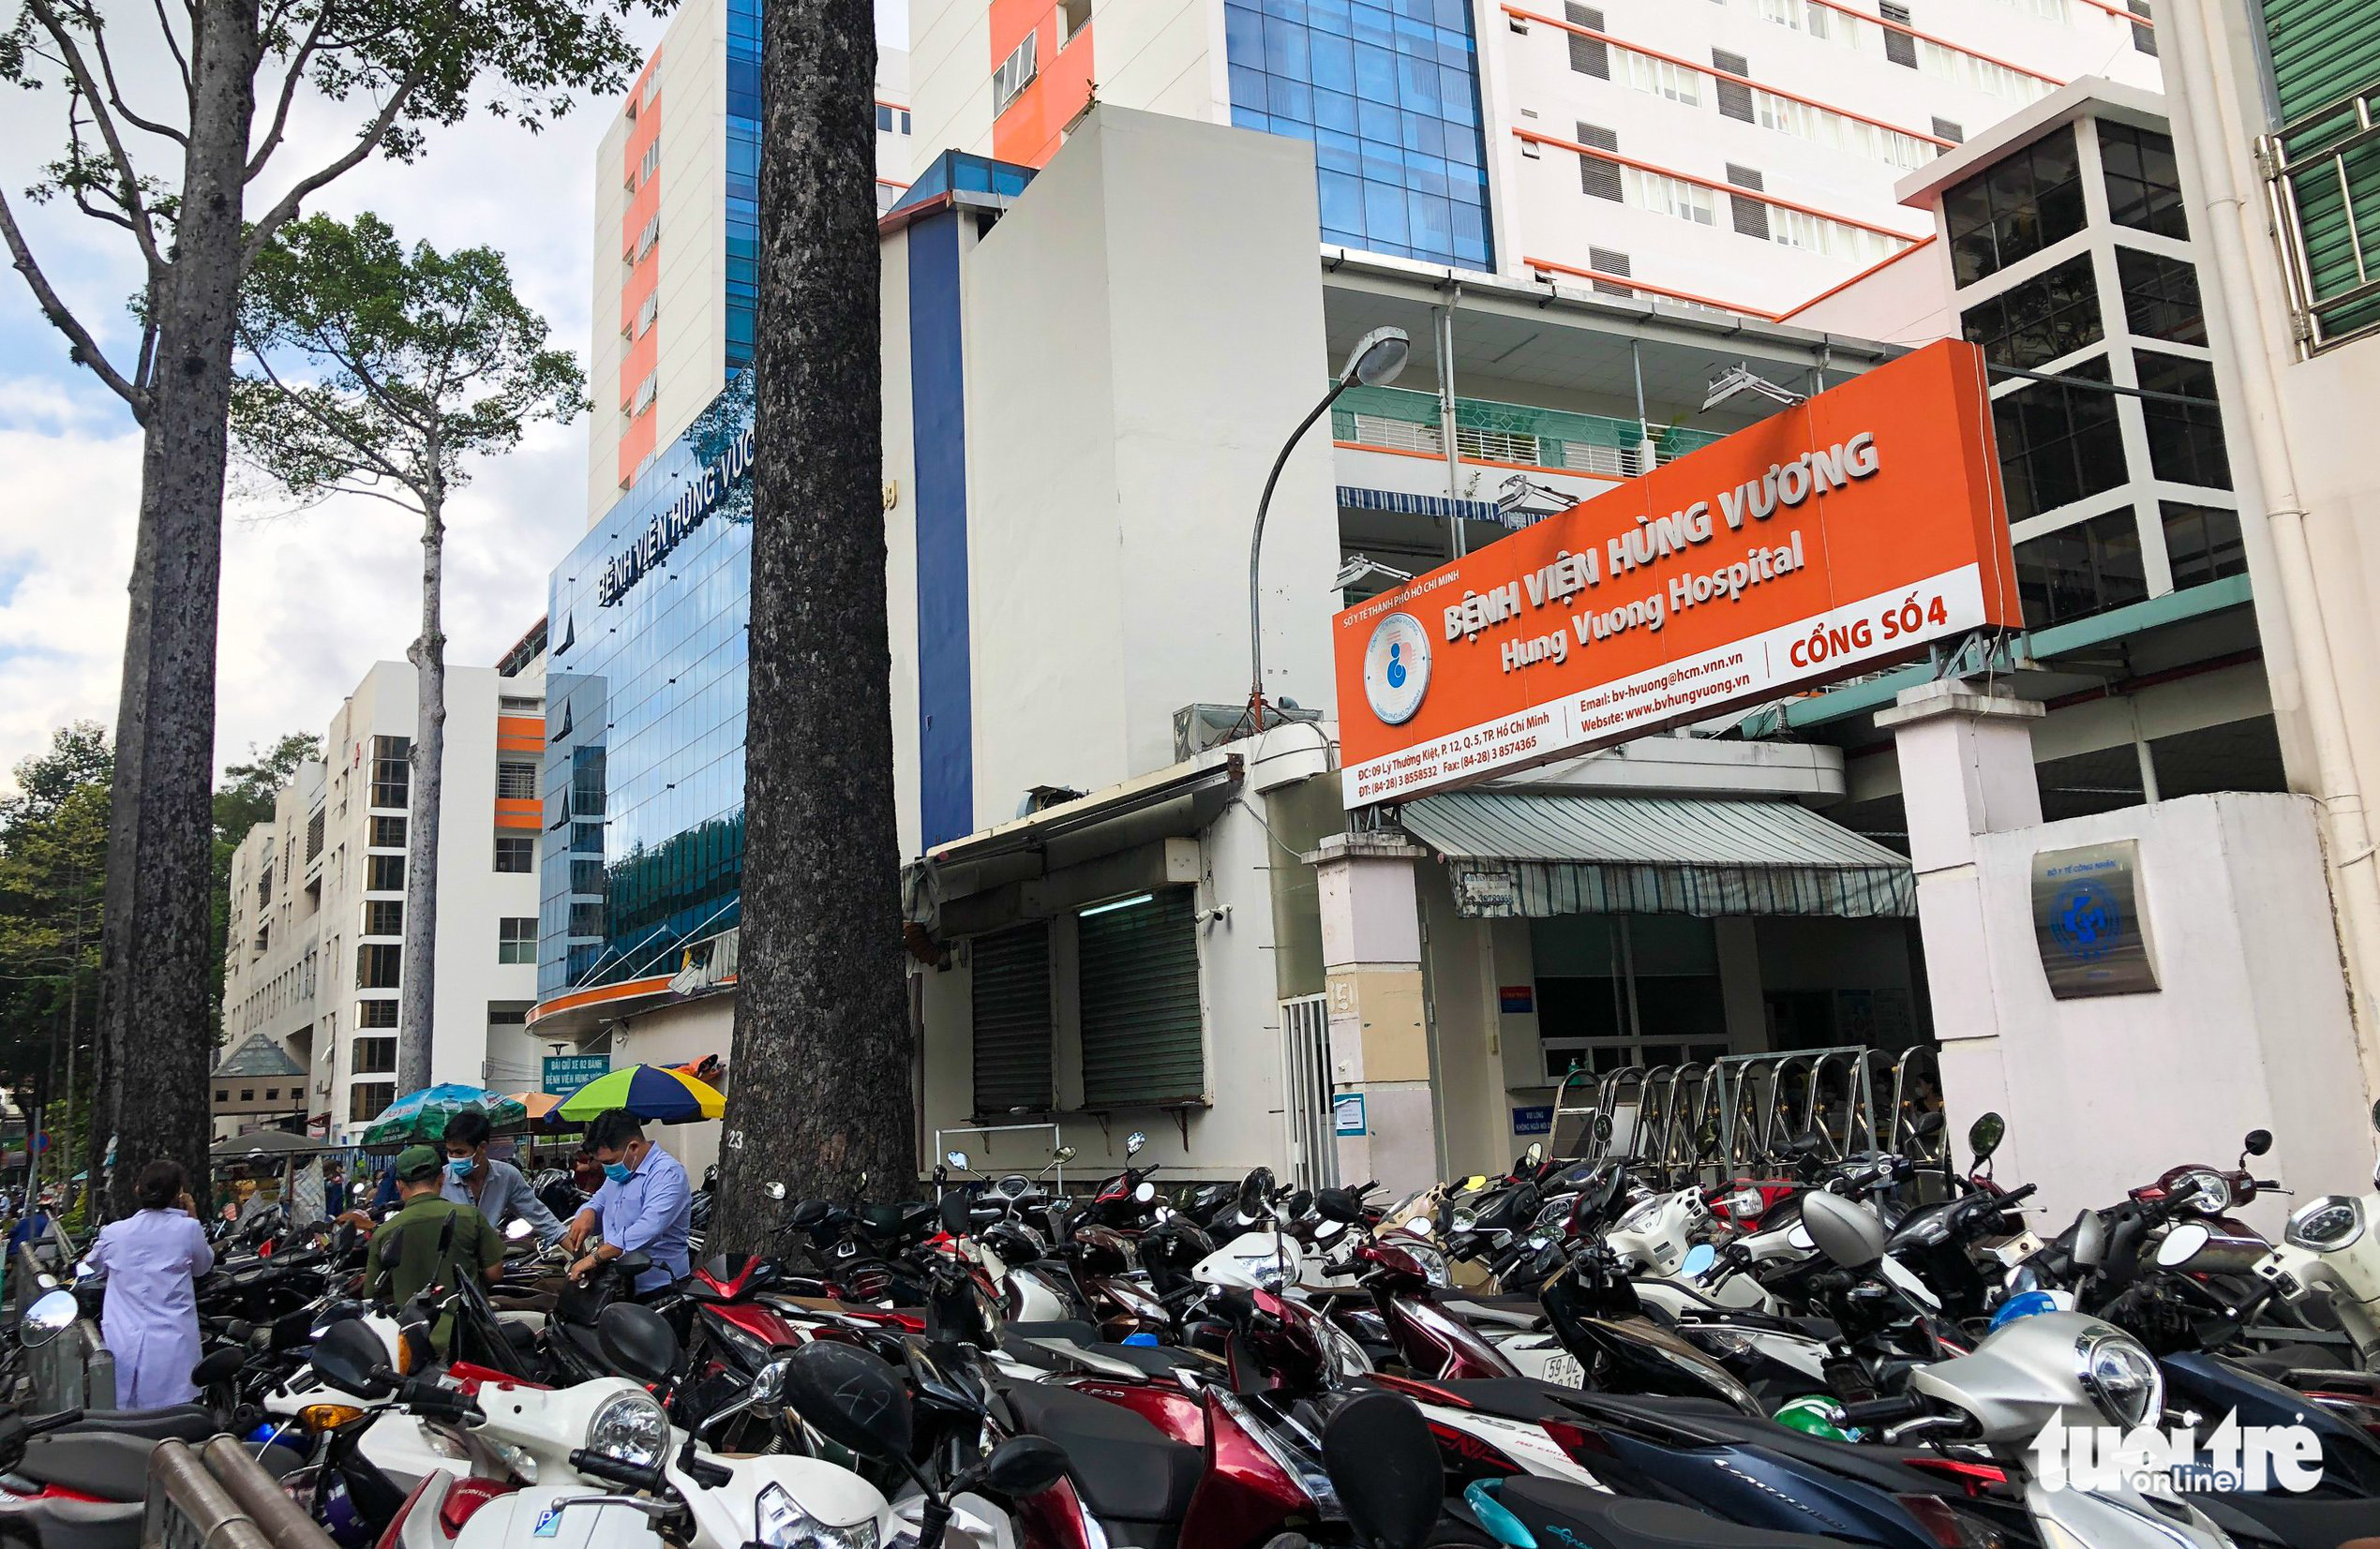 A parking lot on the sidewalk of Hung Vuong Street in front of Hung Vuong Hospital in District 5, Ho Chi Minh City, May 18, 2022. Photo: Chau Tuan / Tuoi Tre